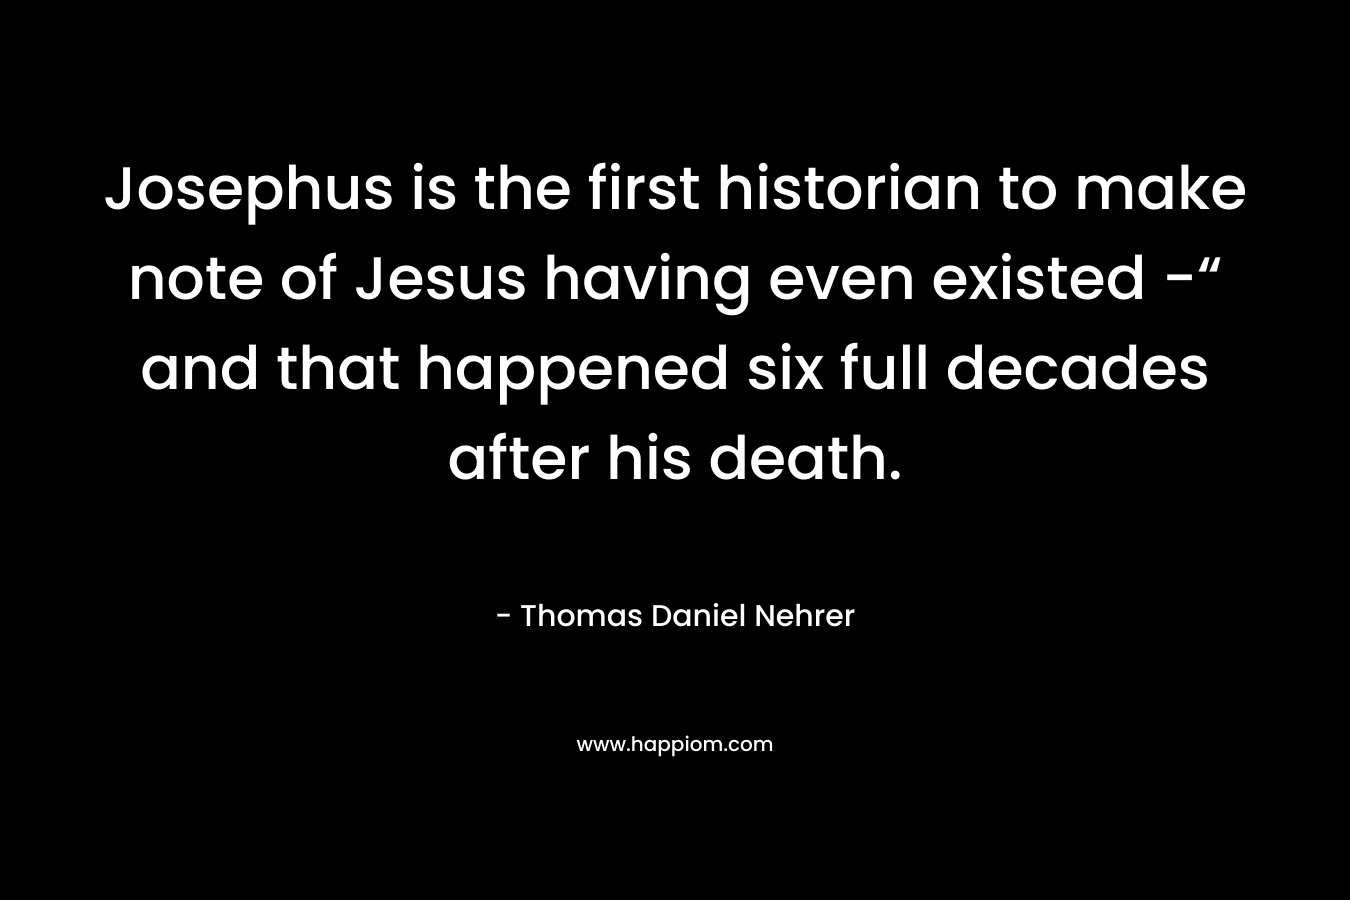 Josephus is the first historian to make note of Jesus having even existed -“ and that happened six full decades after his death. – Thomas Daniel Nehrer